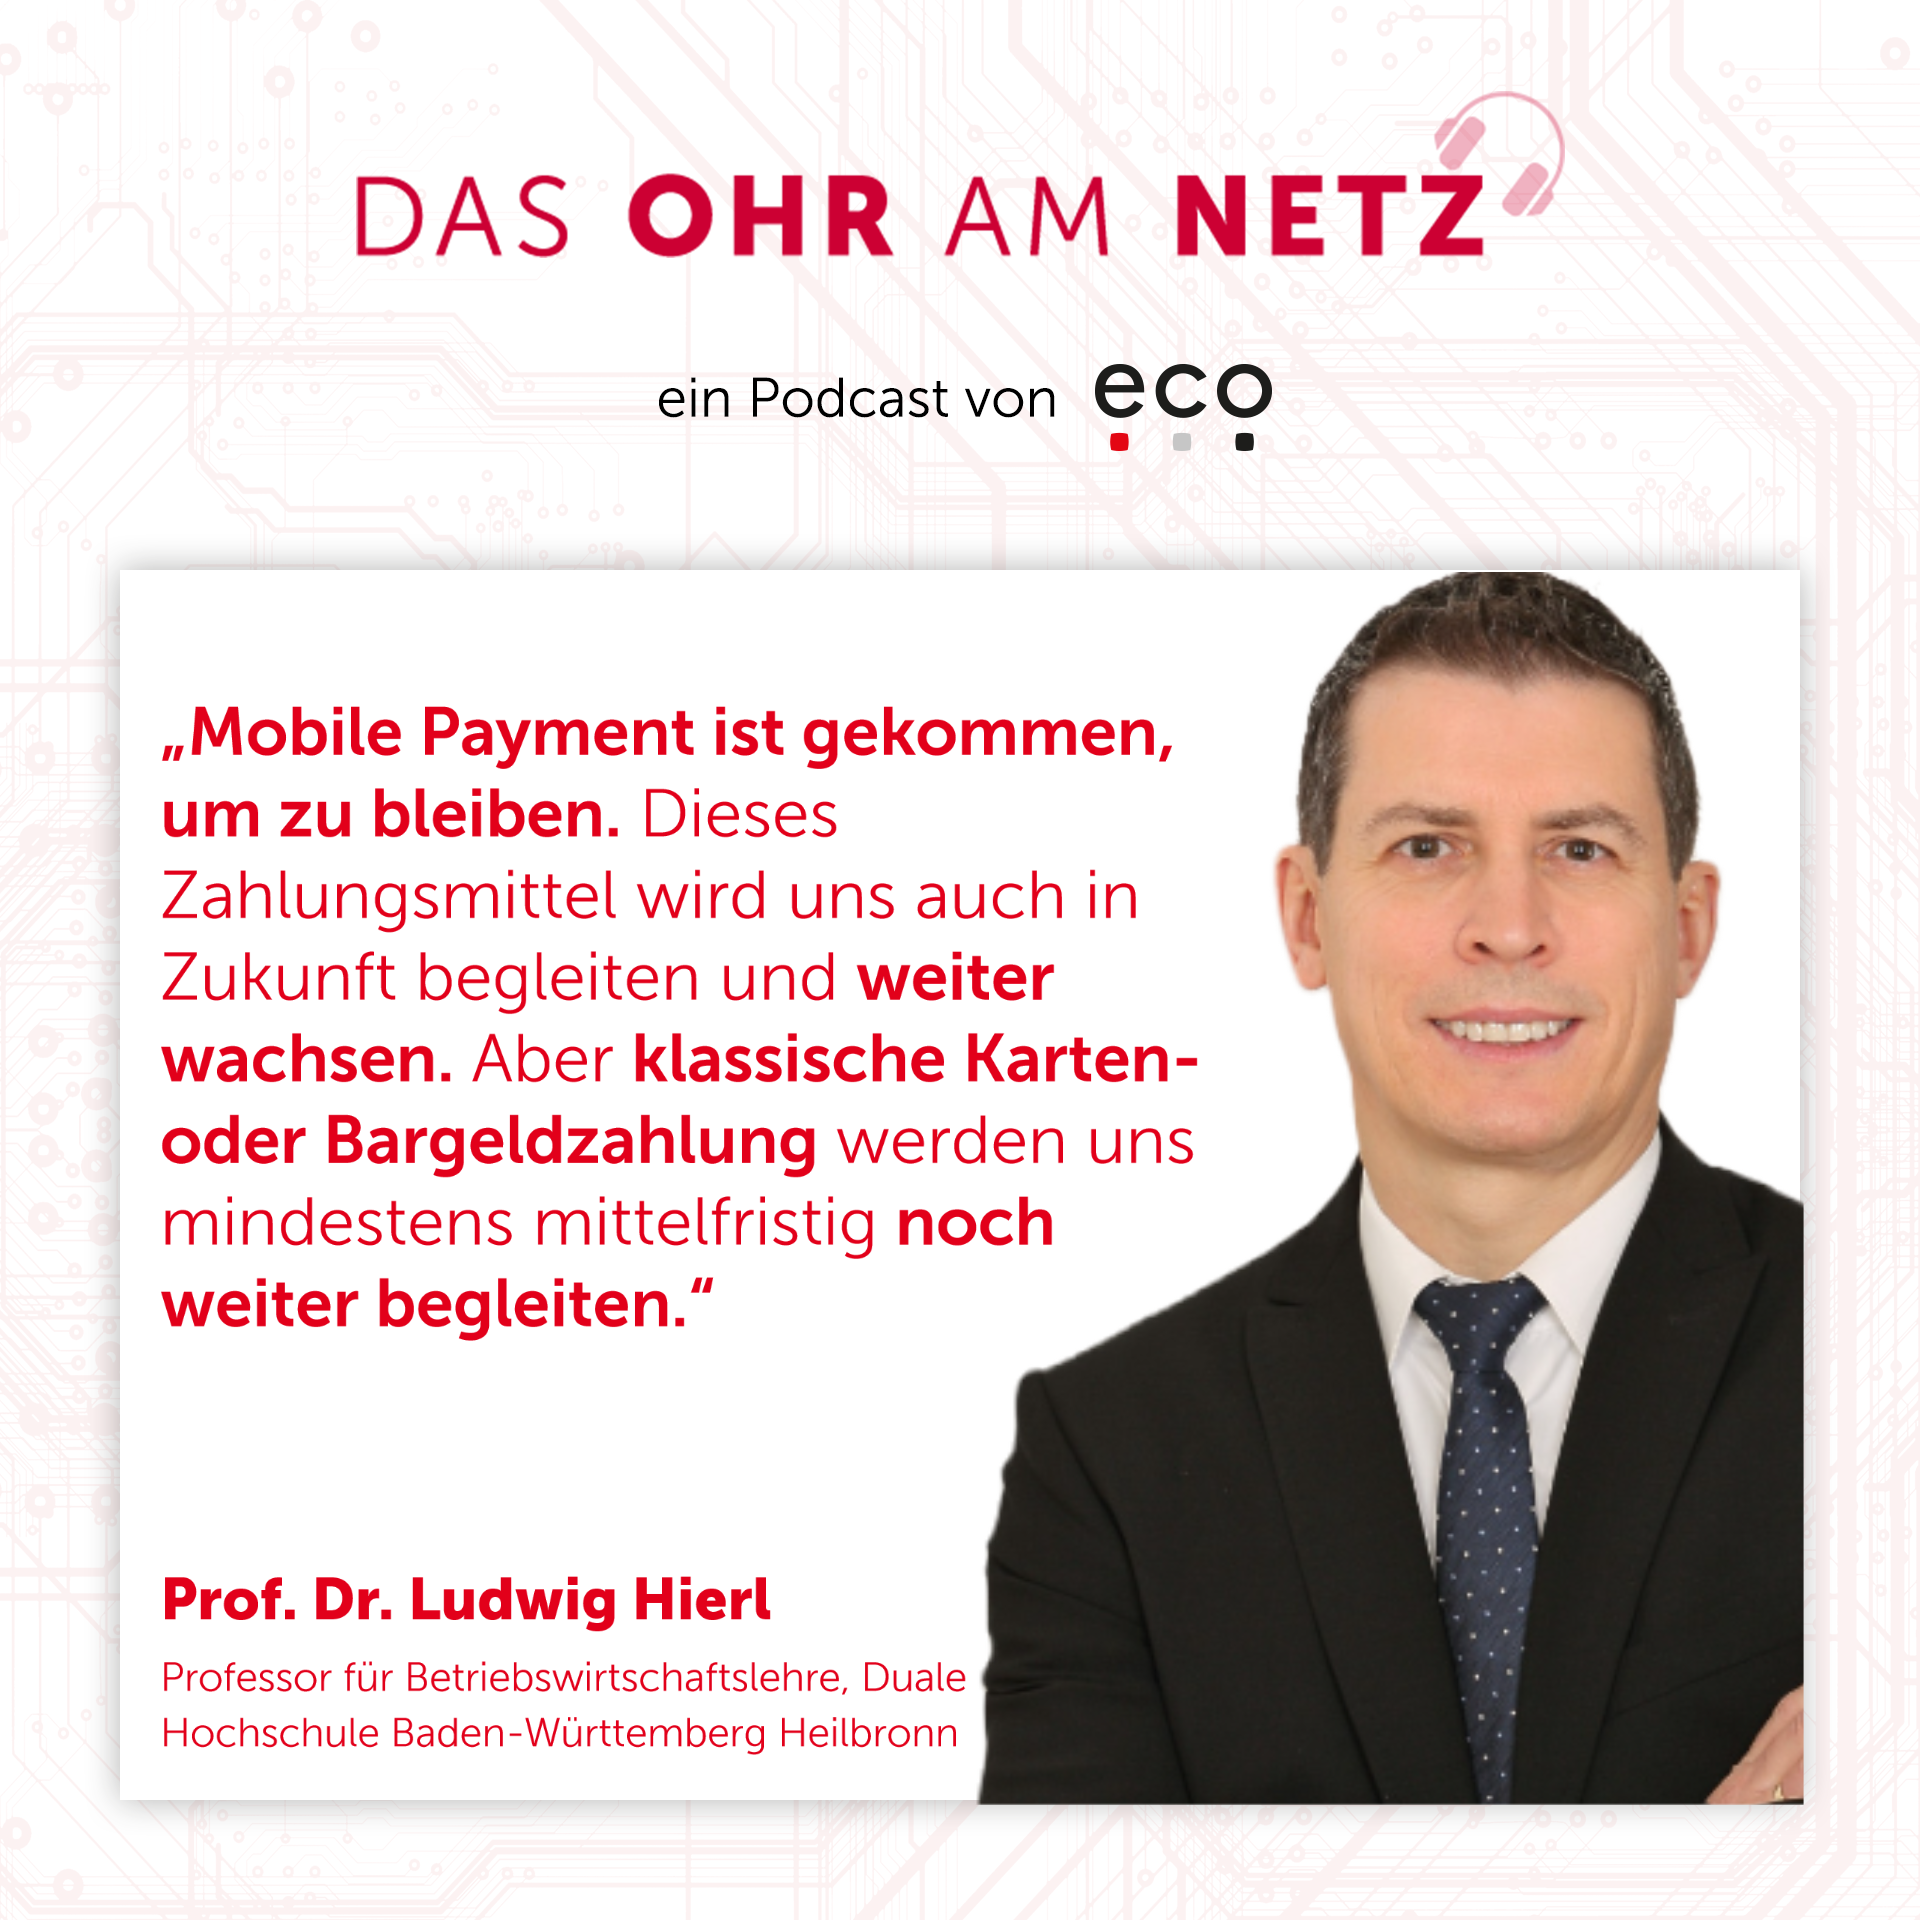 eco Podcast zum Mobile Payment